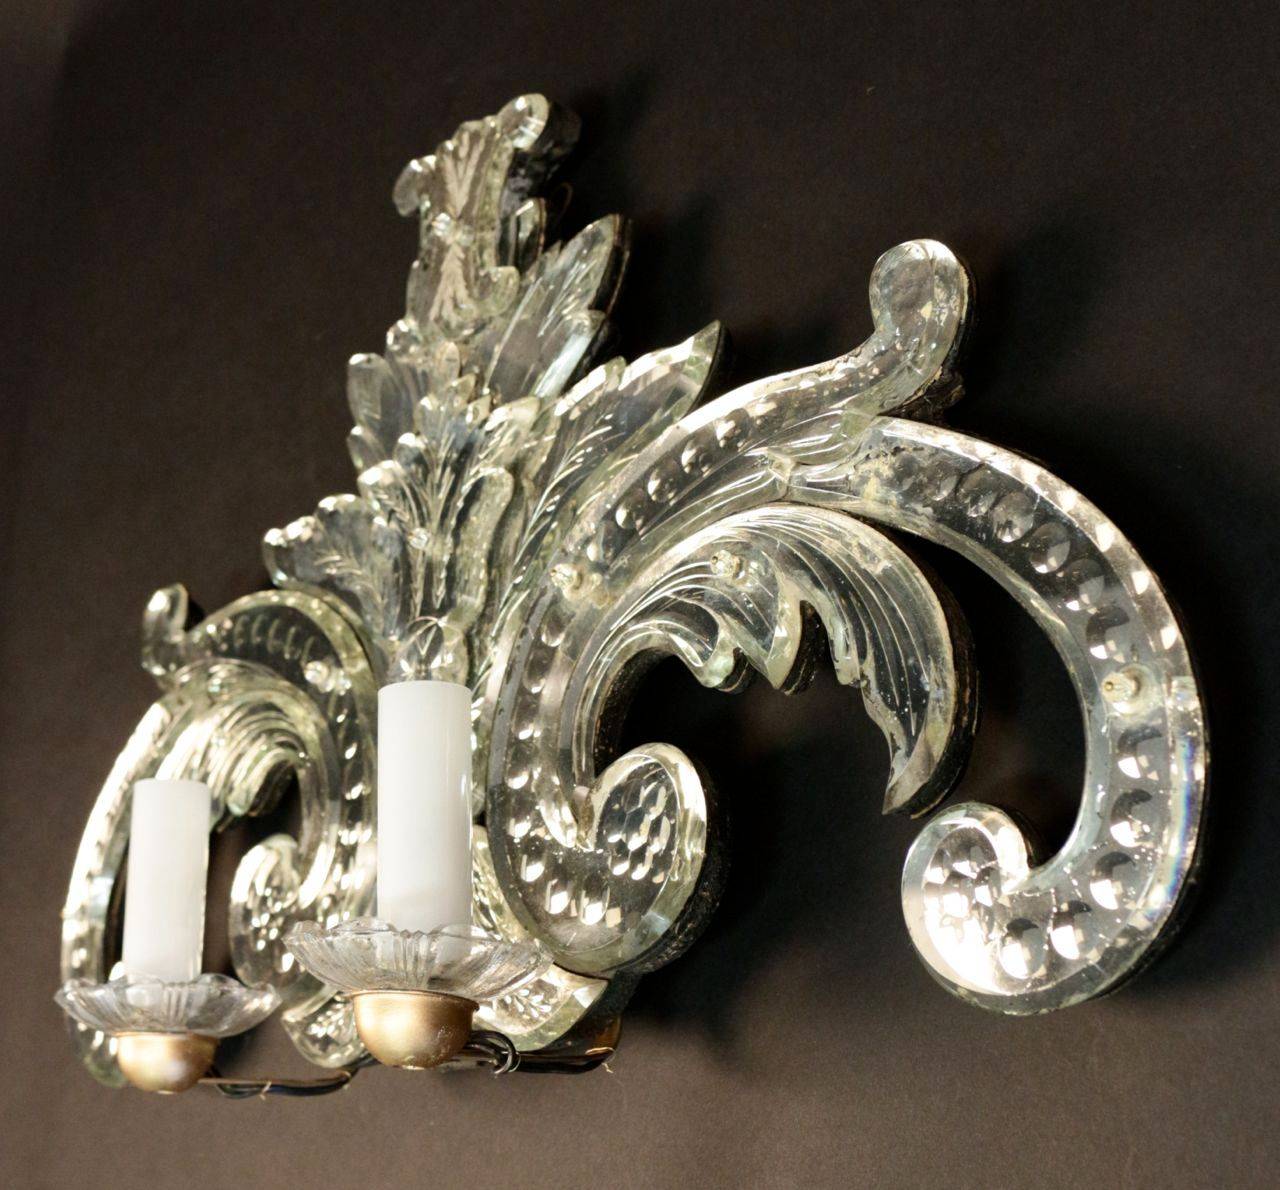 Large 'Acanthus Leave' sconce in eglomise glass. This sconce is a part of a set available on 1stdibs under reference LU98582207132.